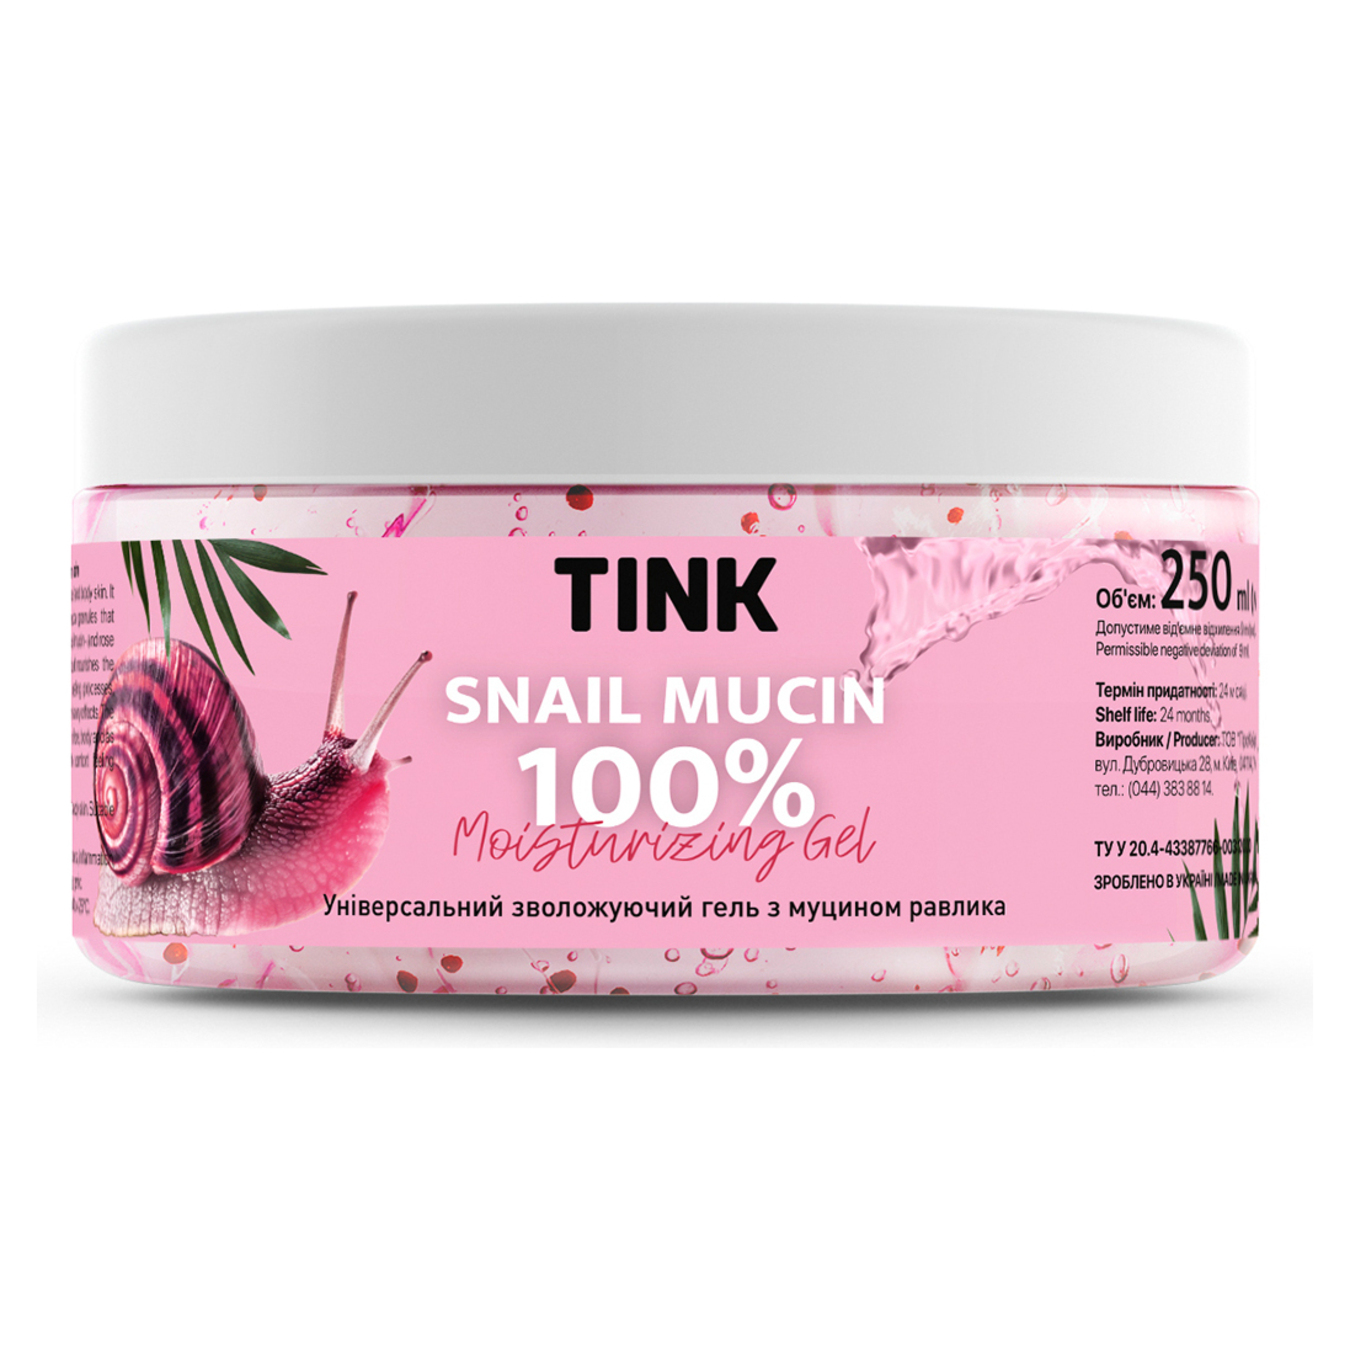 Tink moisturizing gel for face and body with snail 250ml